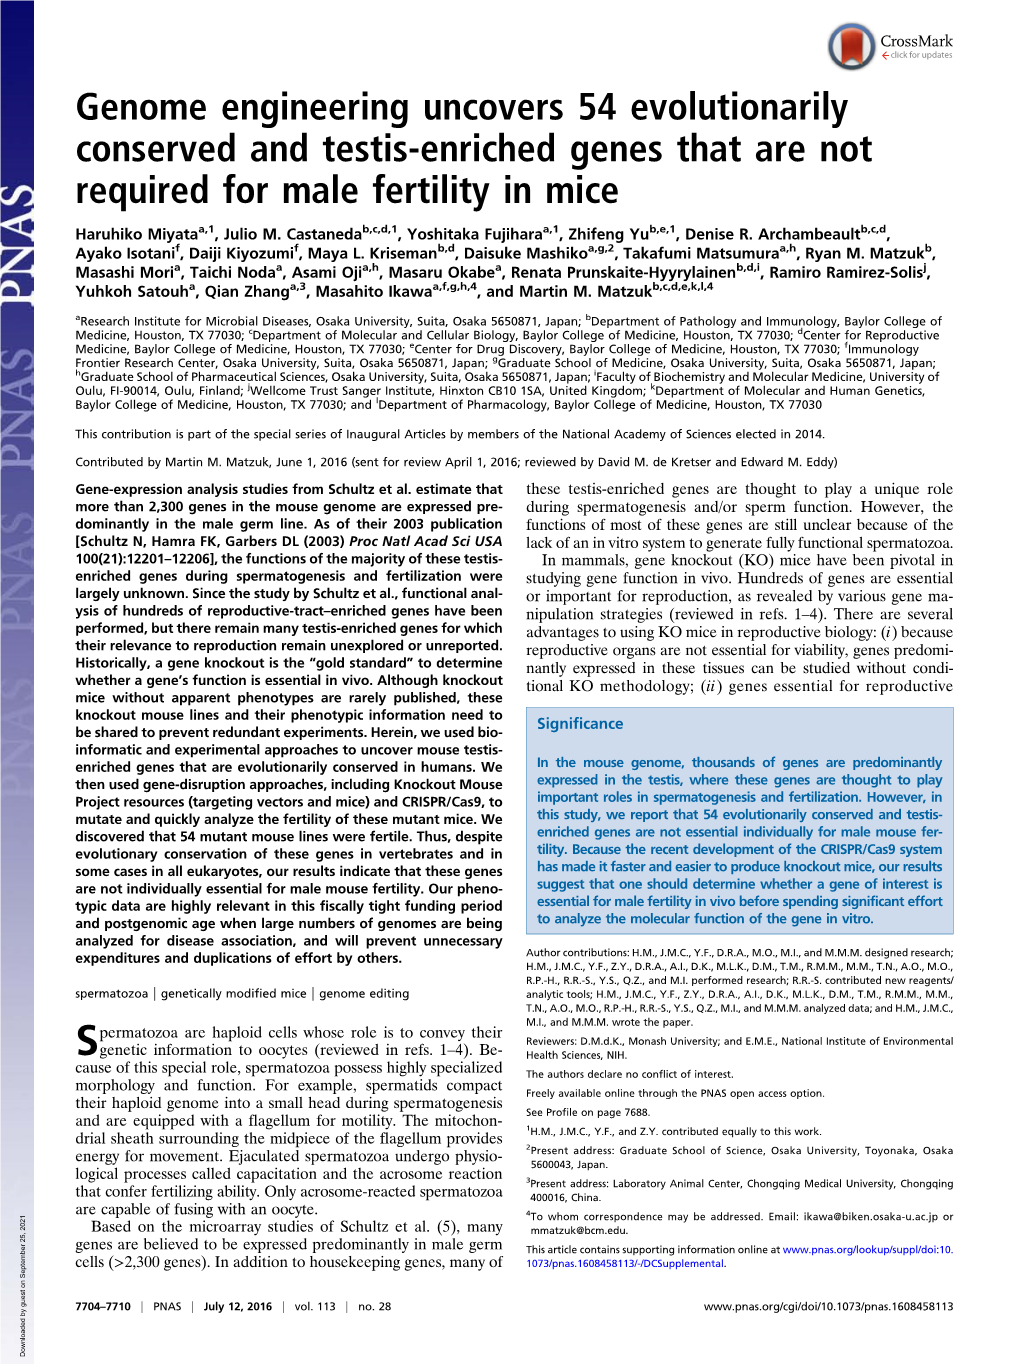 Genome Engineering Uncovers 54 Evolutionarily Conserved and Testis-Enriched Genes That Are Not Required for Male Fertility in Mice